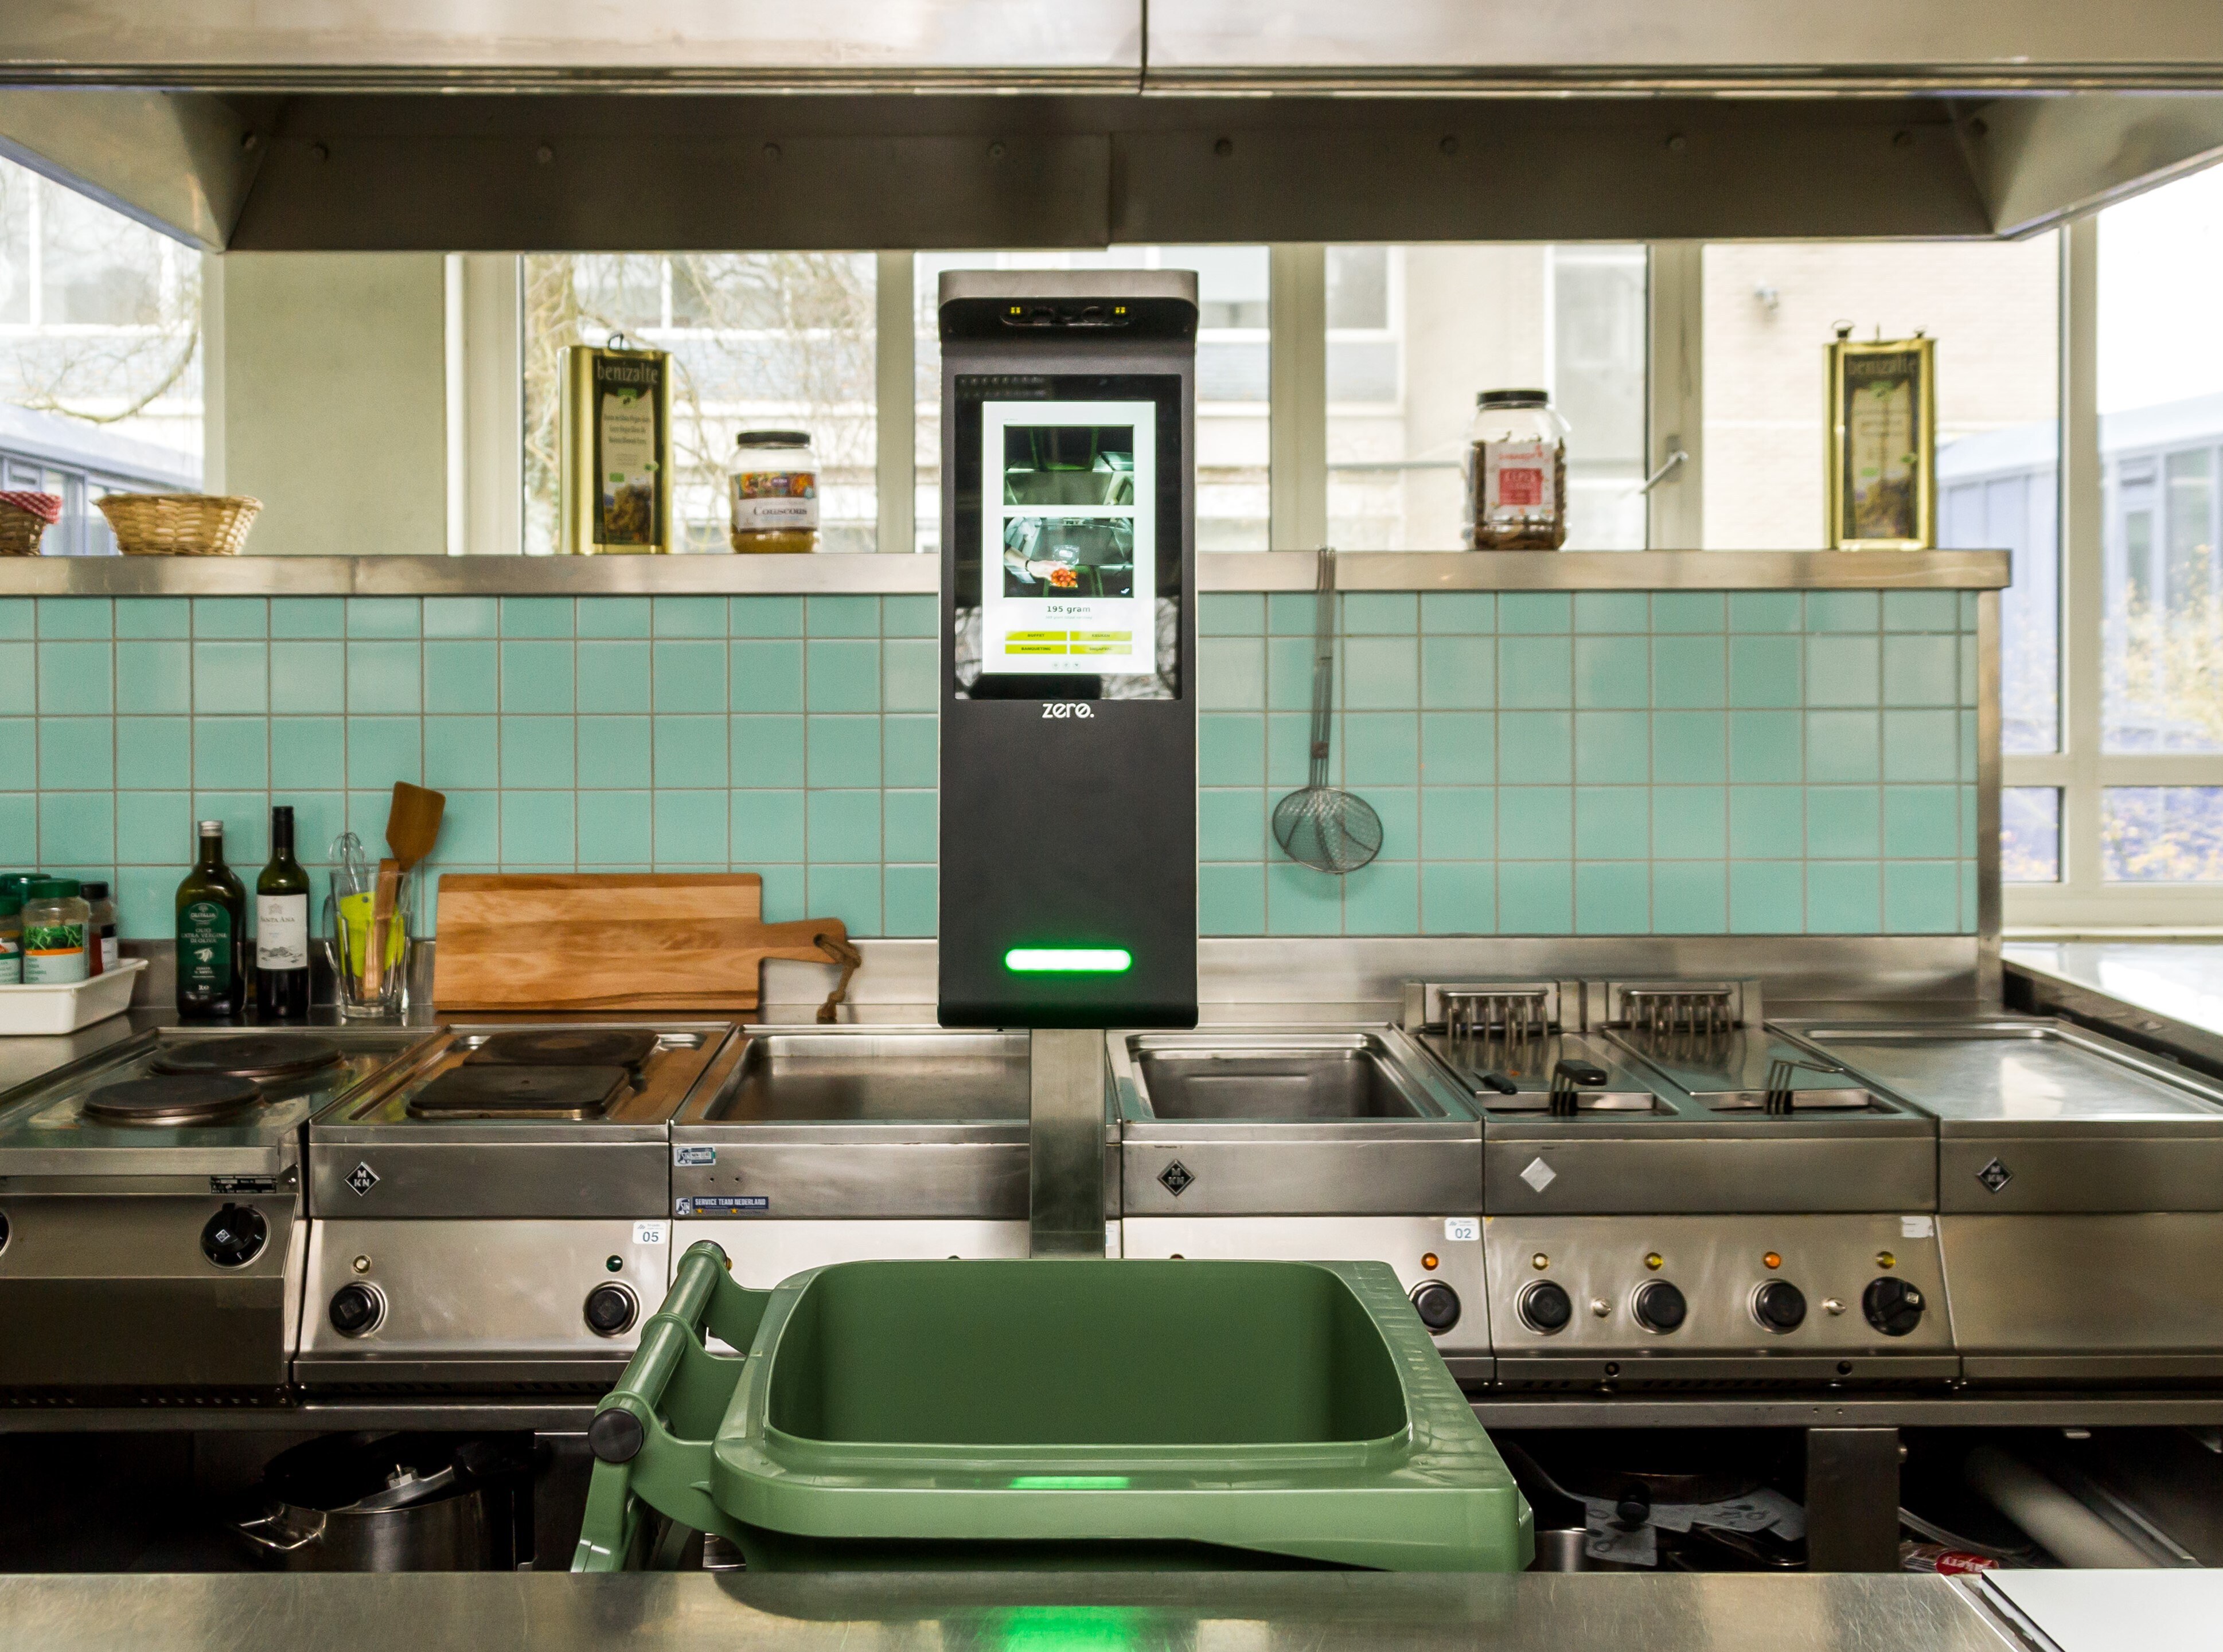 Orbisk: Monitors and reduces food waste in professional kitchens by employing progressive AI technology that improves sustainability and profitability.